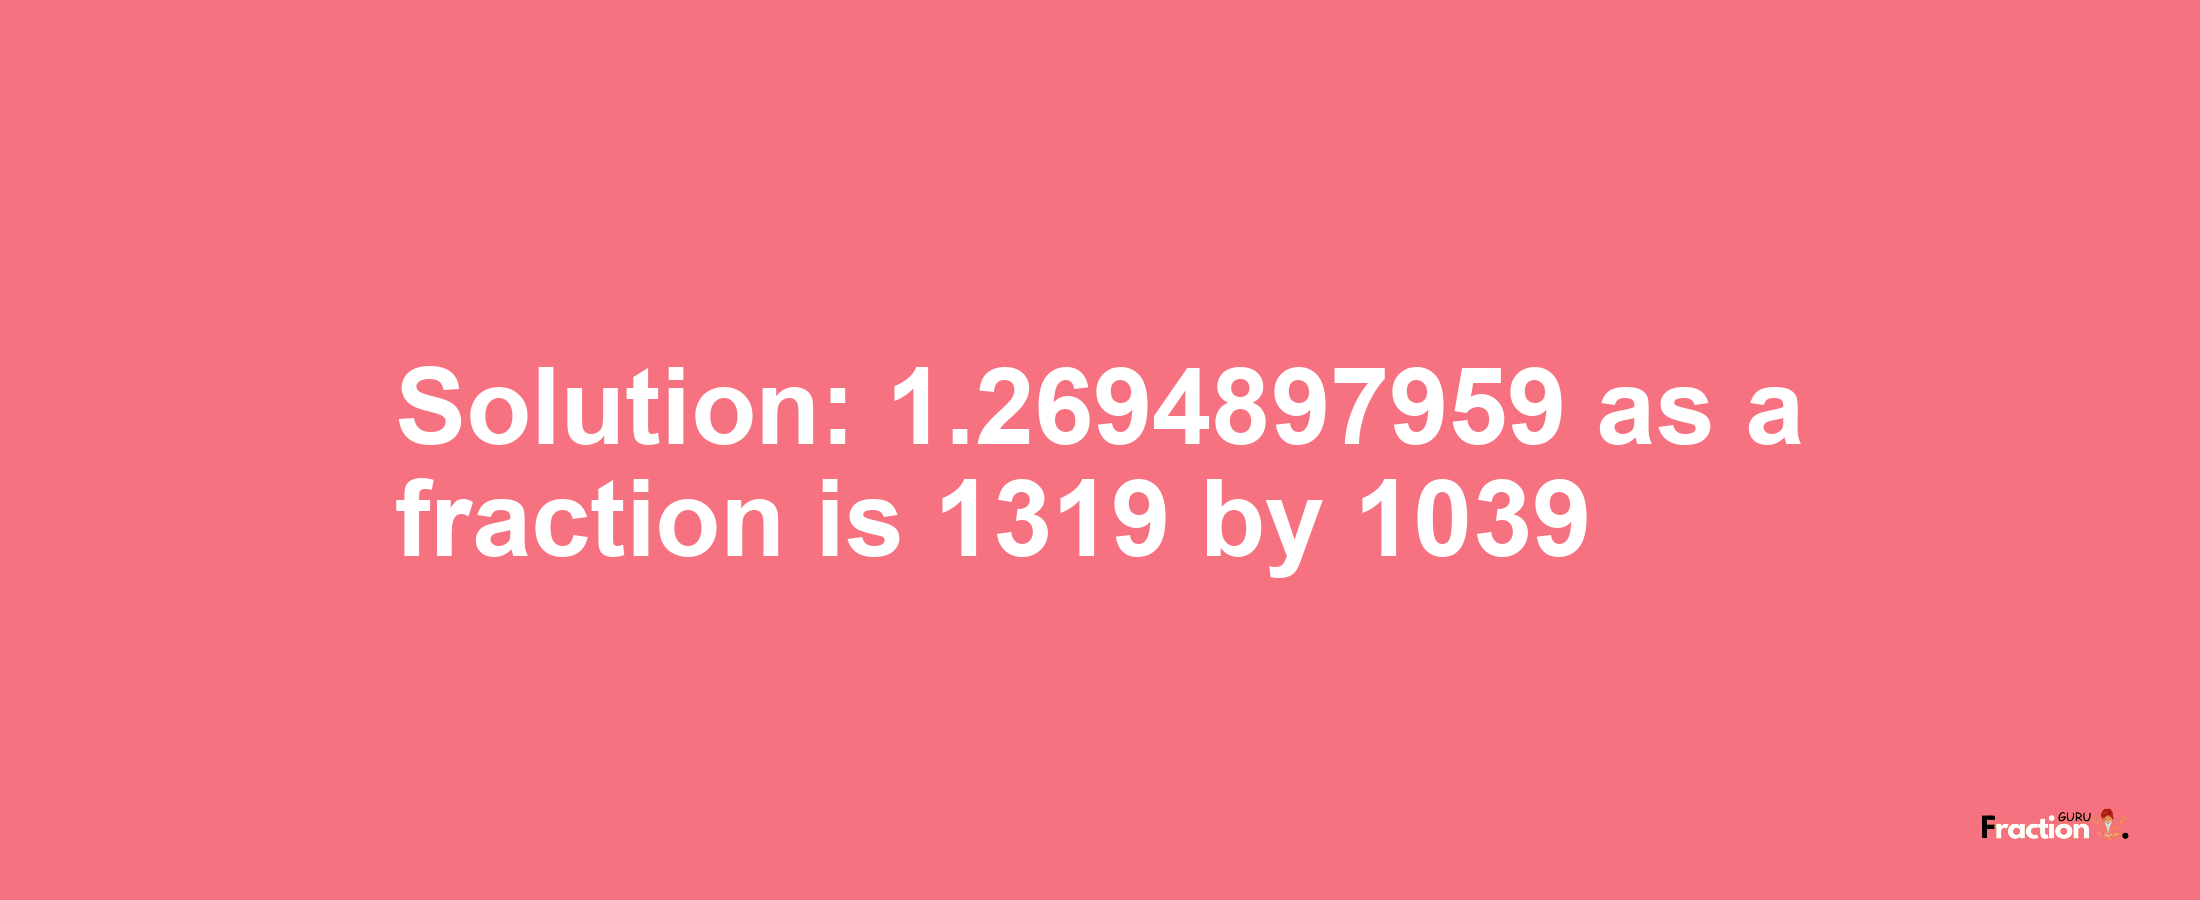 Solution:1.2694897959 as a fraction is 1319/1039